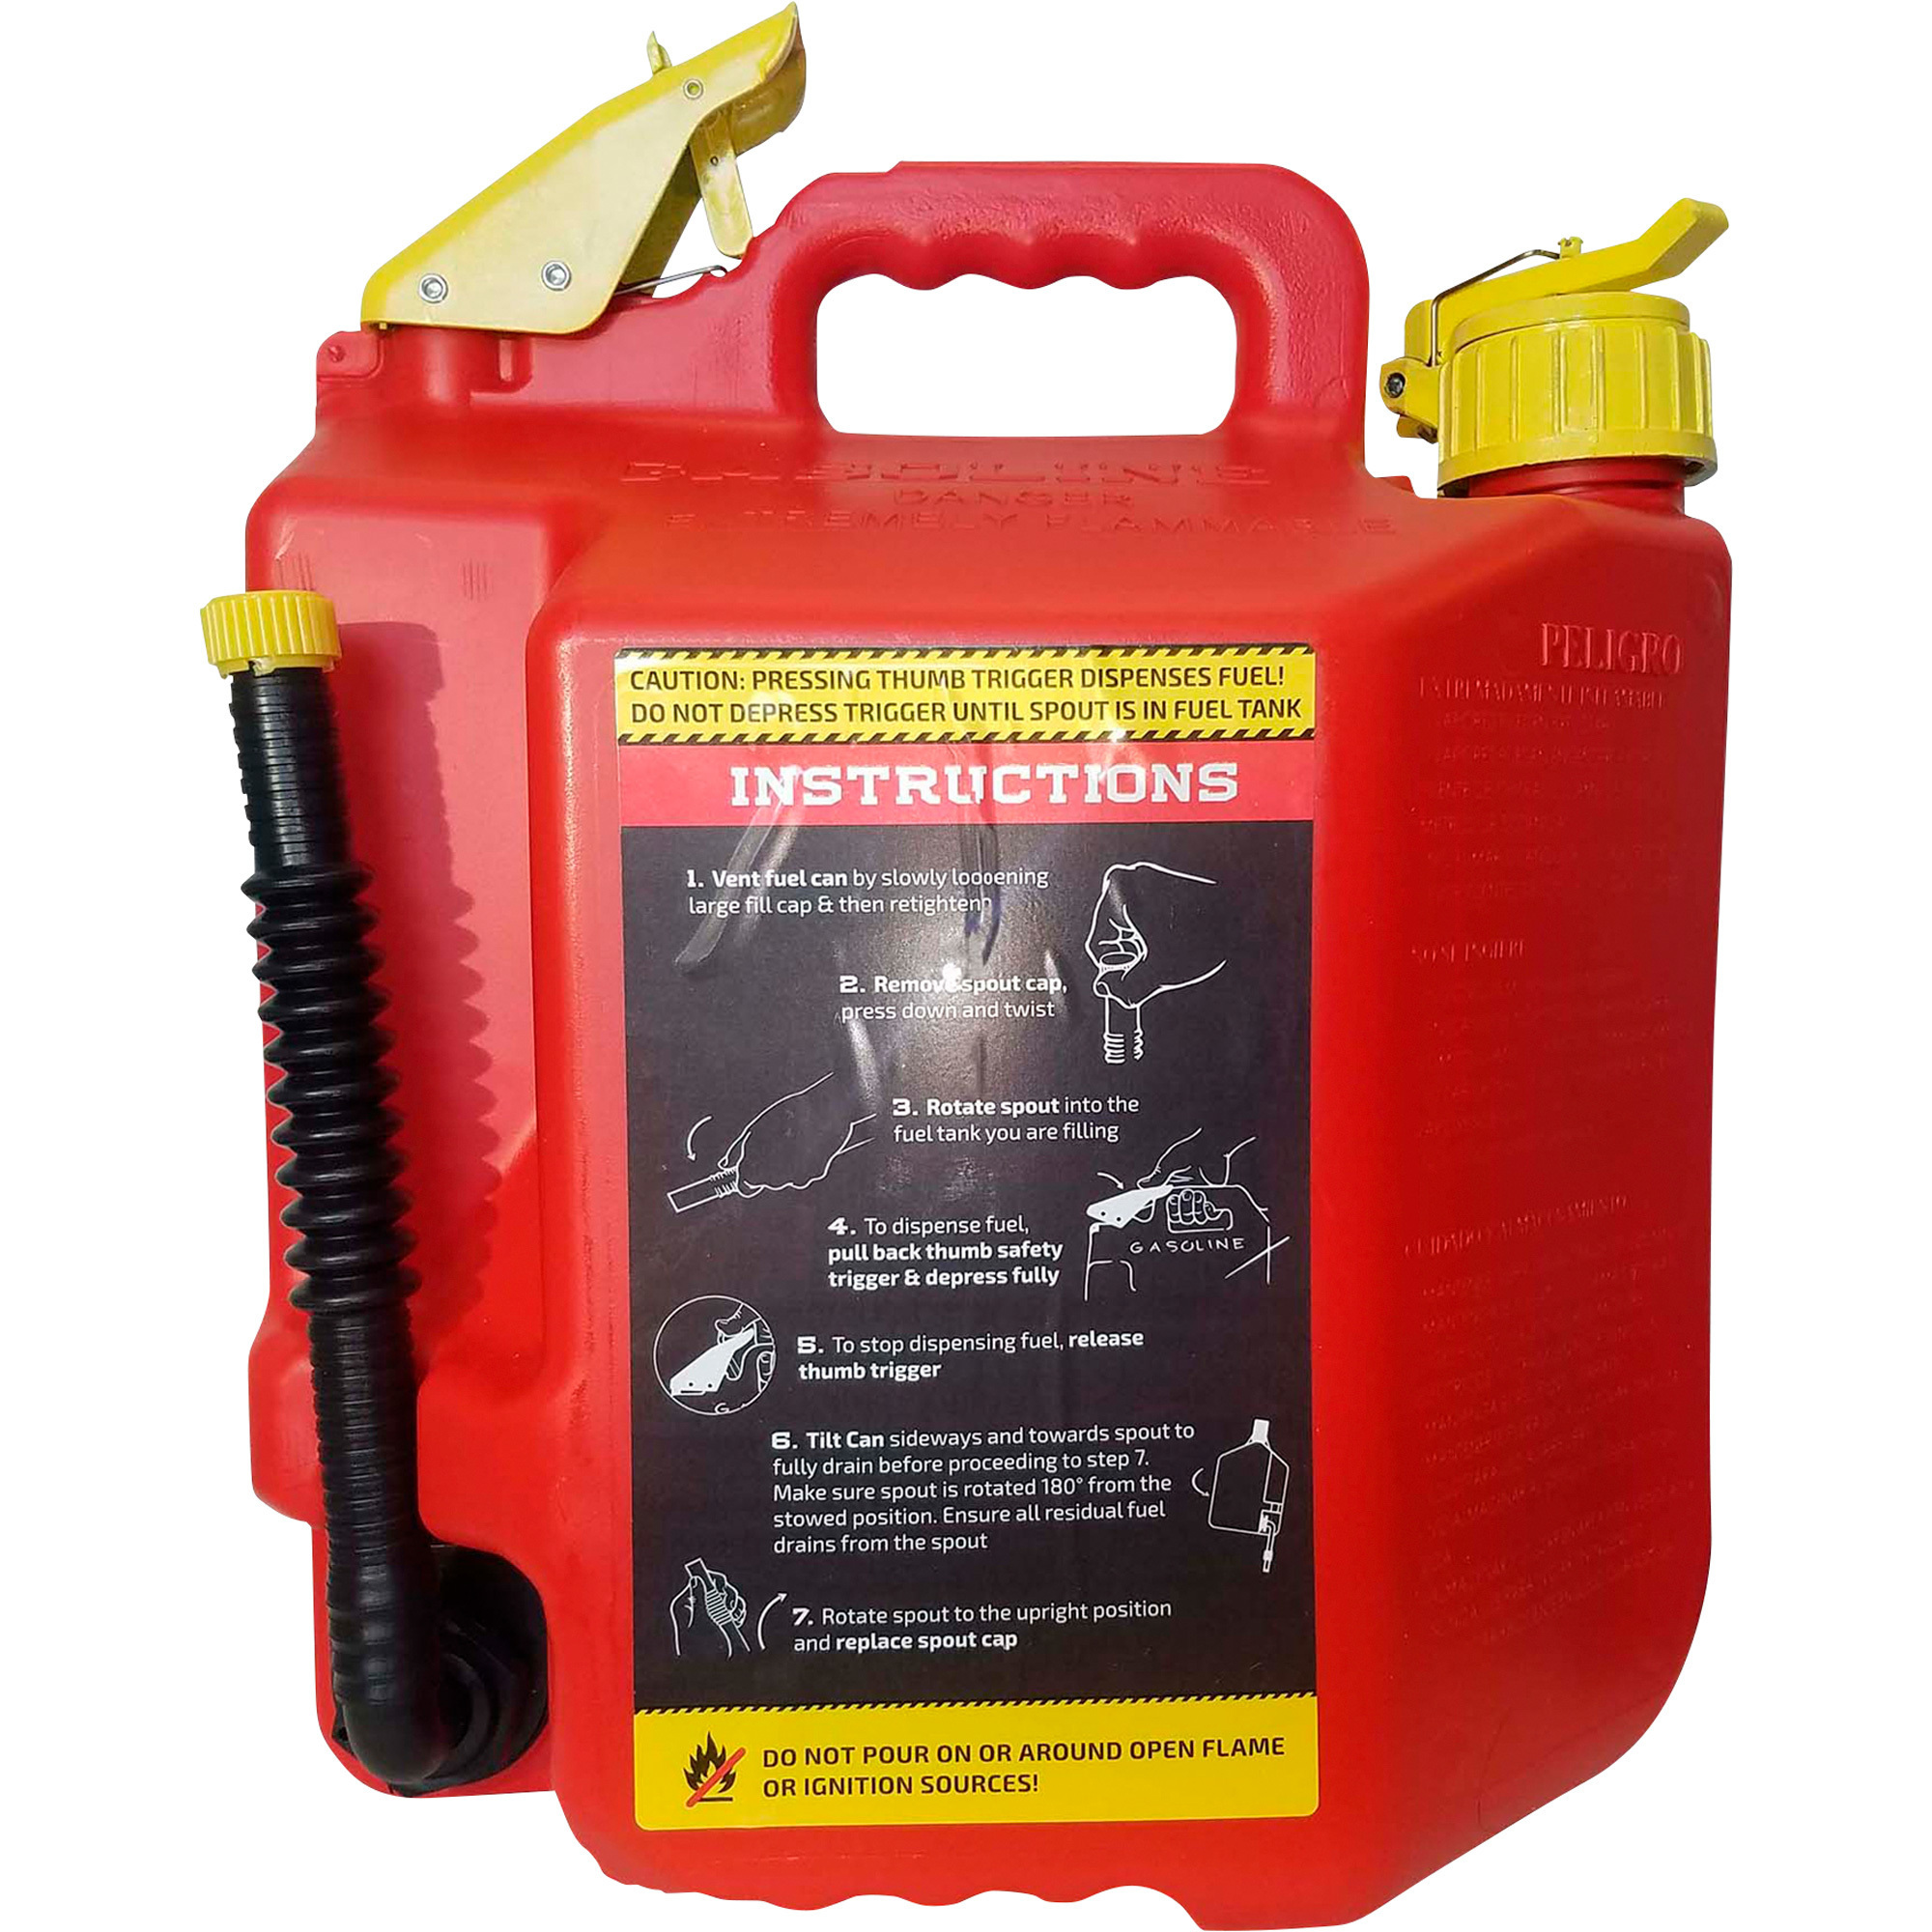 5 Gallon SureCan Gas Can, Standard Edition - Fletcher Products